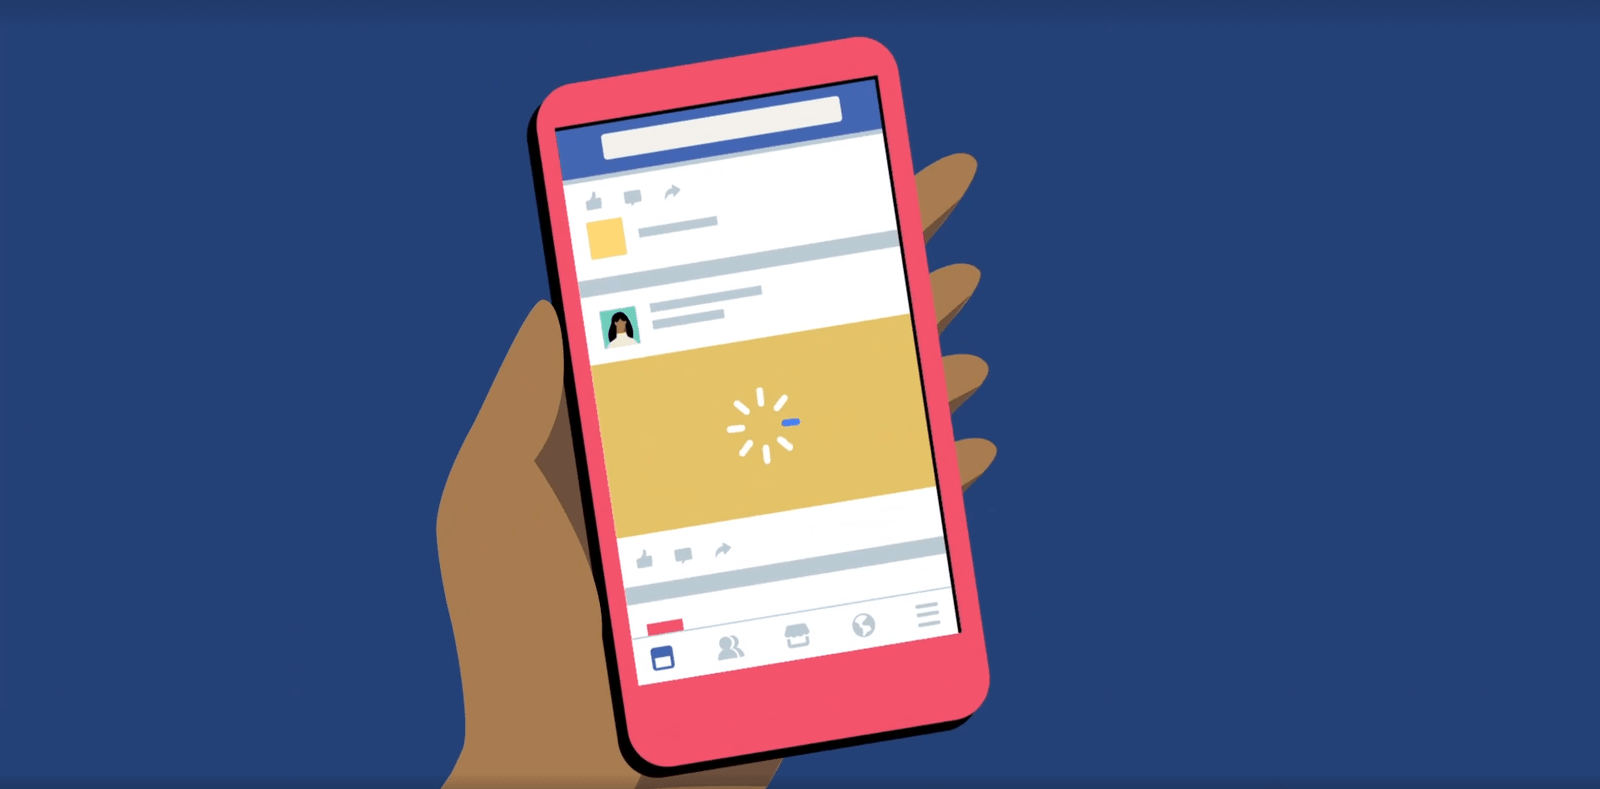 Facebook has a new feature that gives you more control over your News